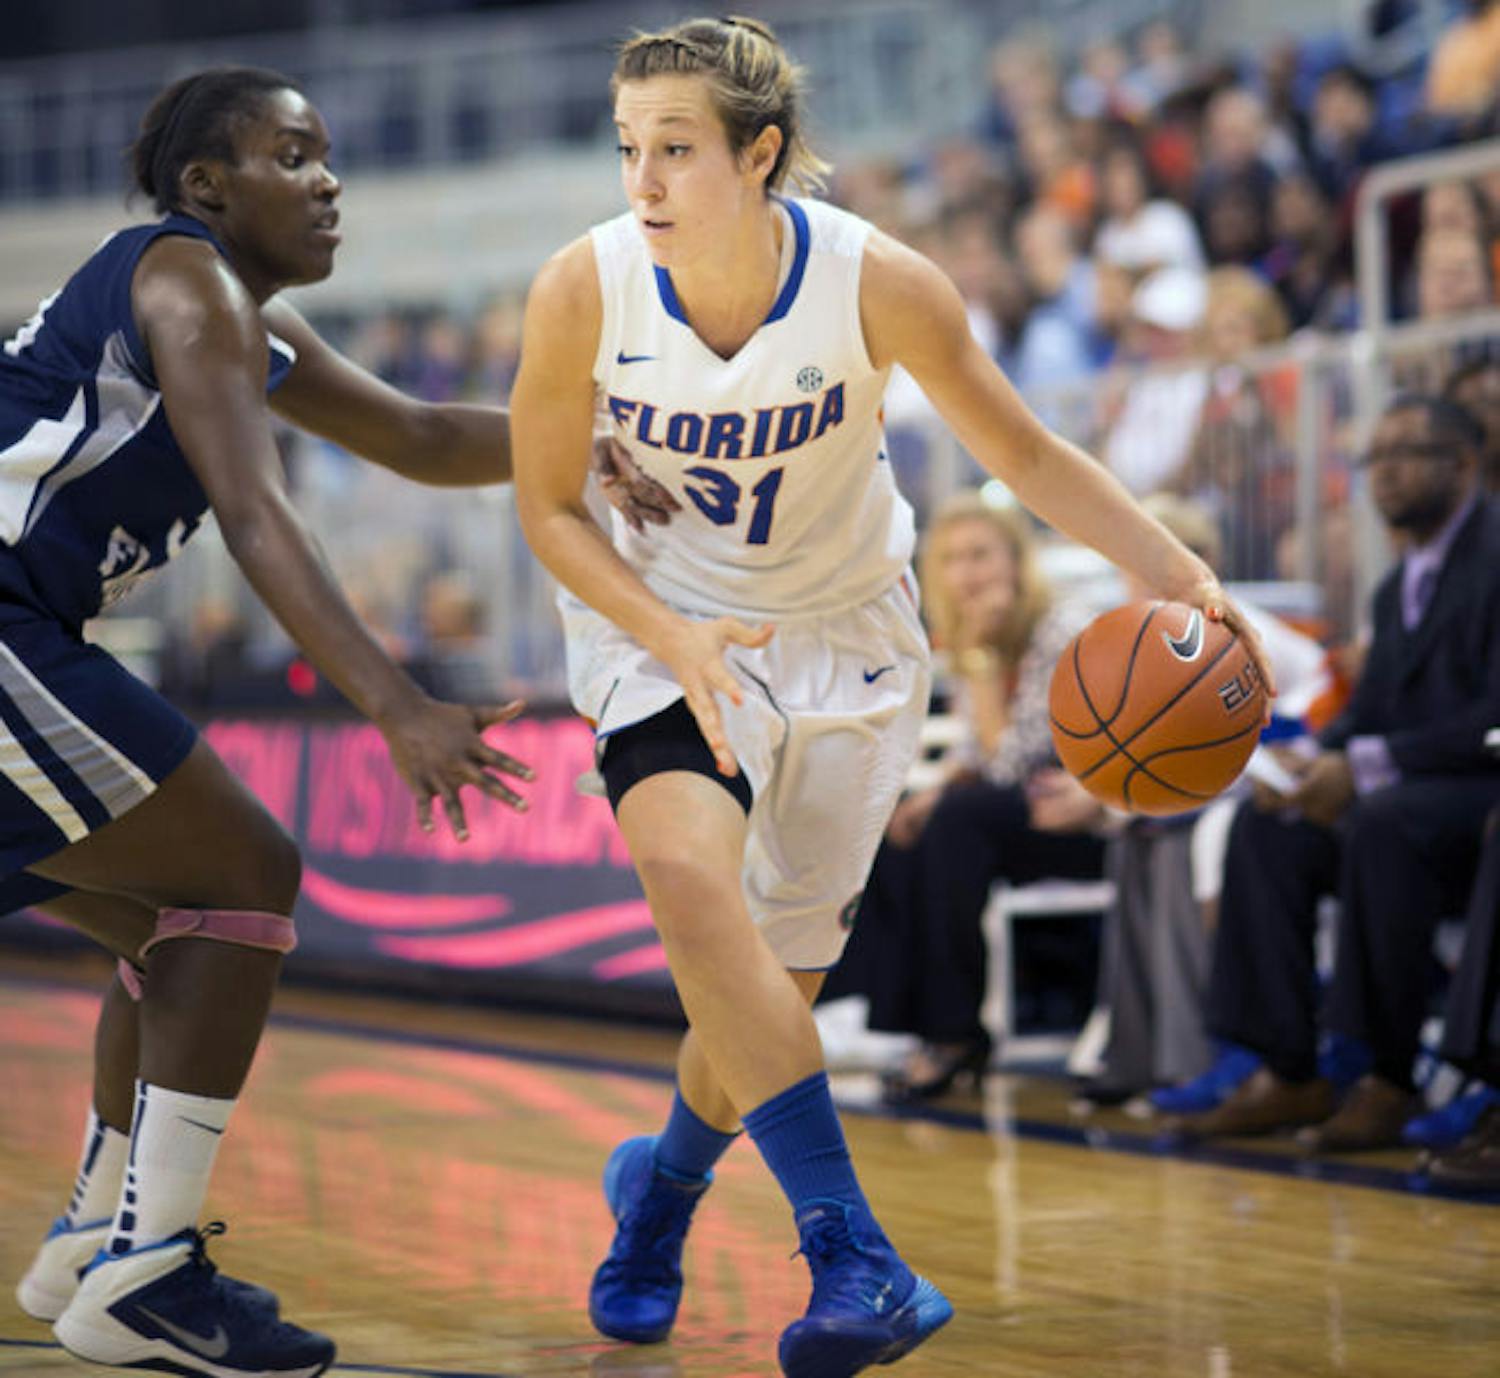 Redshirt senior forward Lily Svete dribbles the basketball during Florida's 88-77 win against North Florida on Nov. 10 in the O'Connell Center.